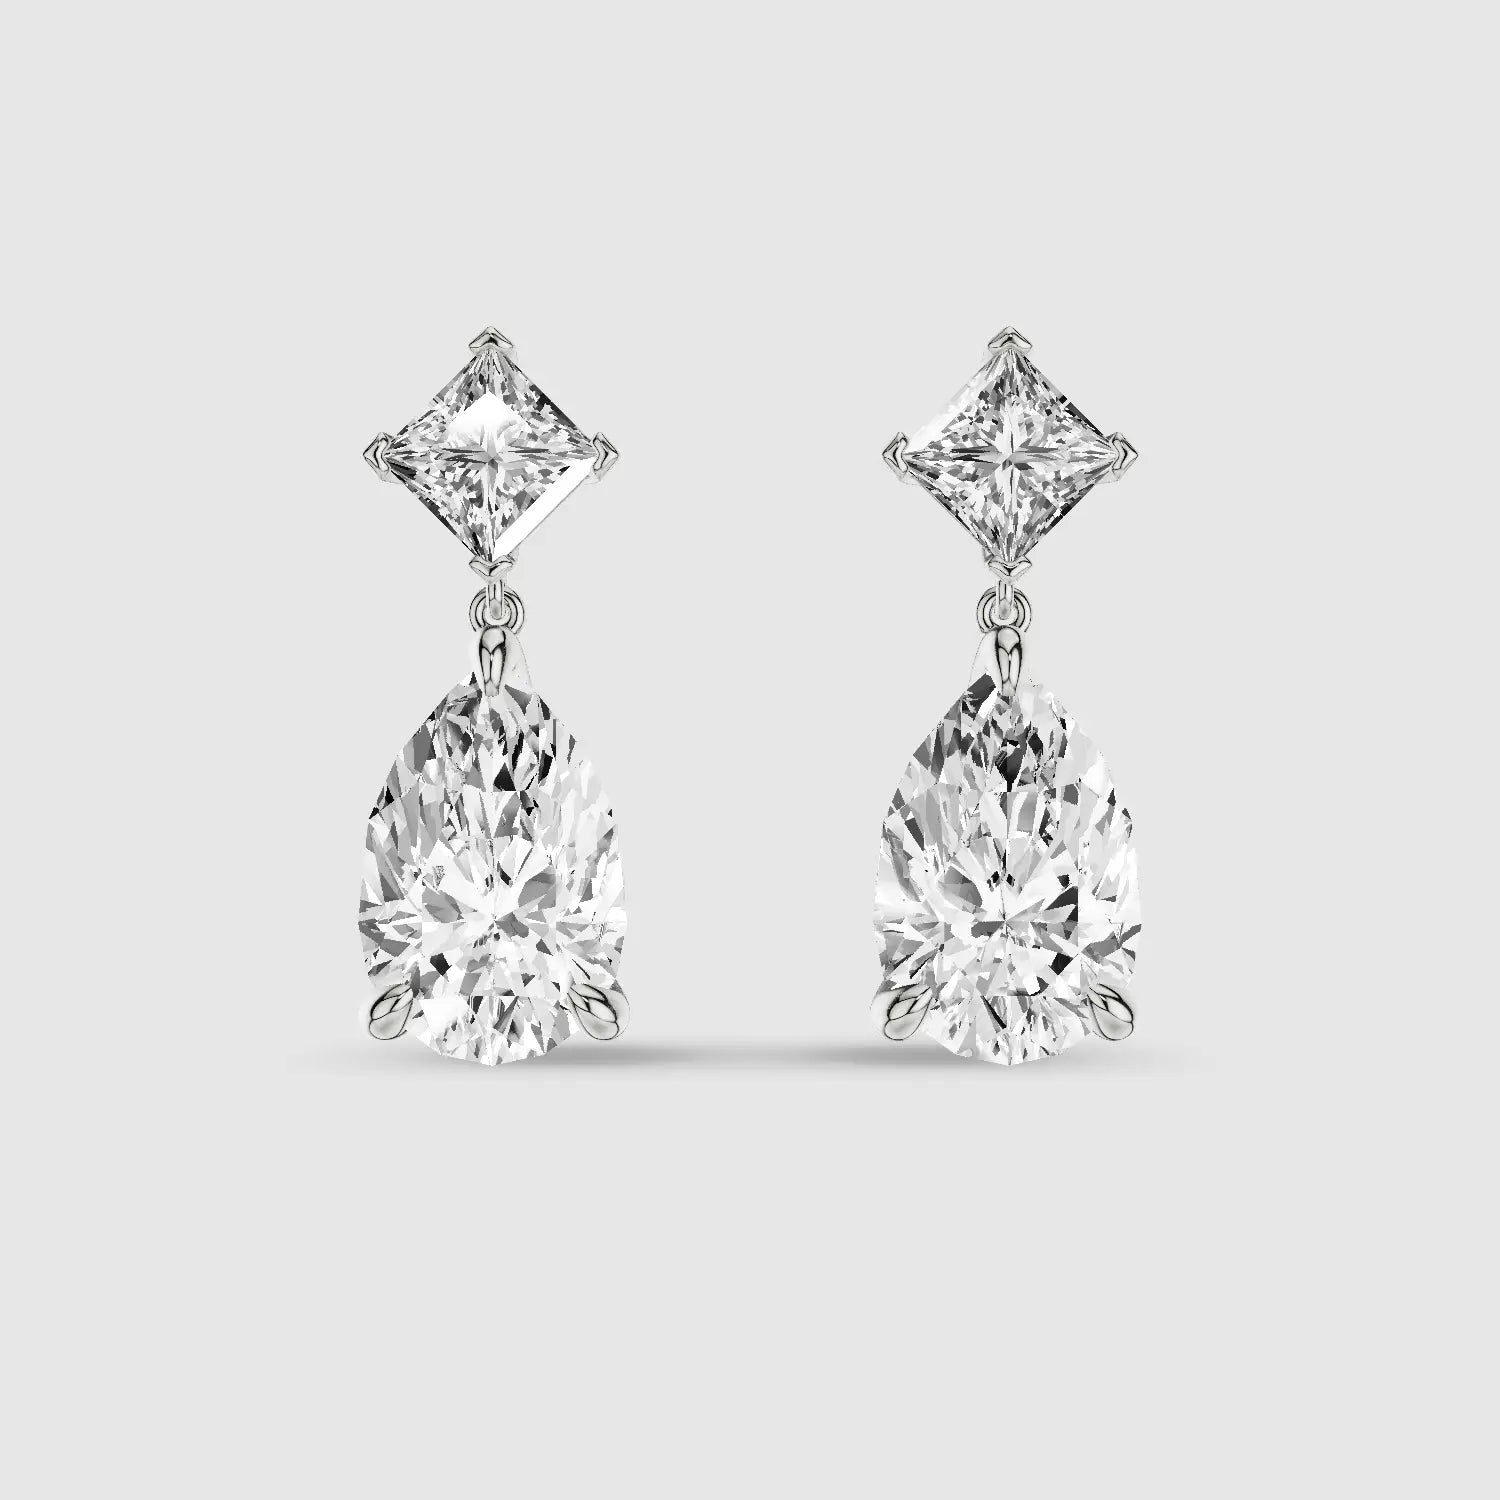 Choose the perfect diamond earrings for your face